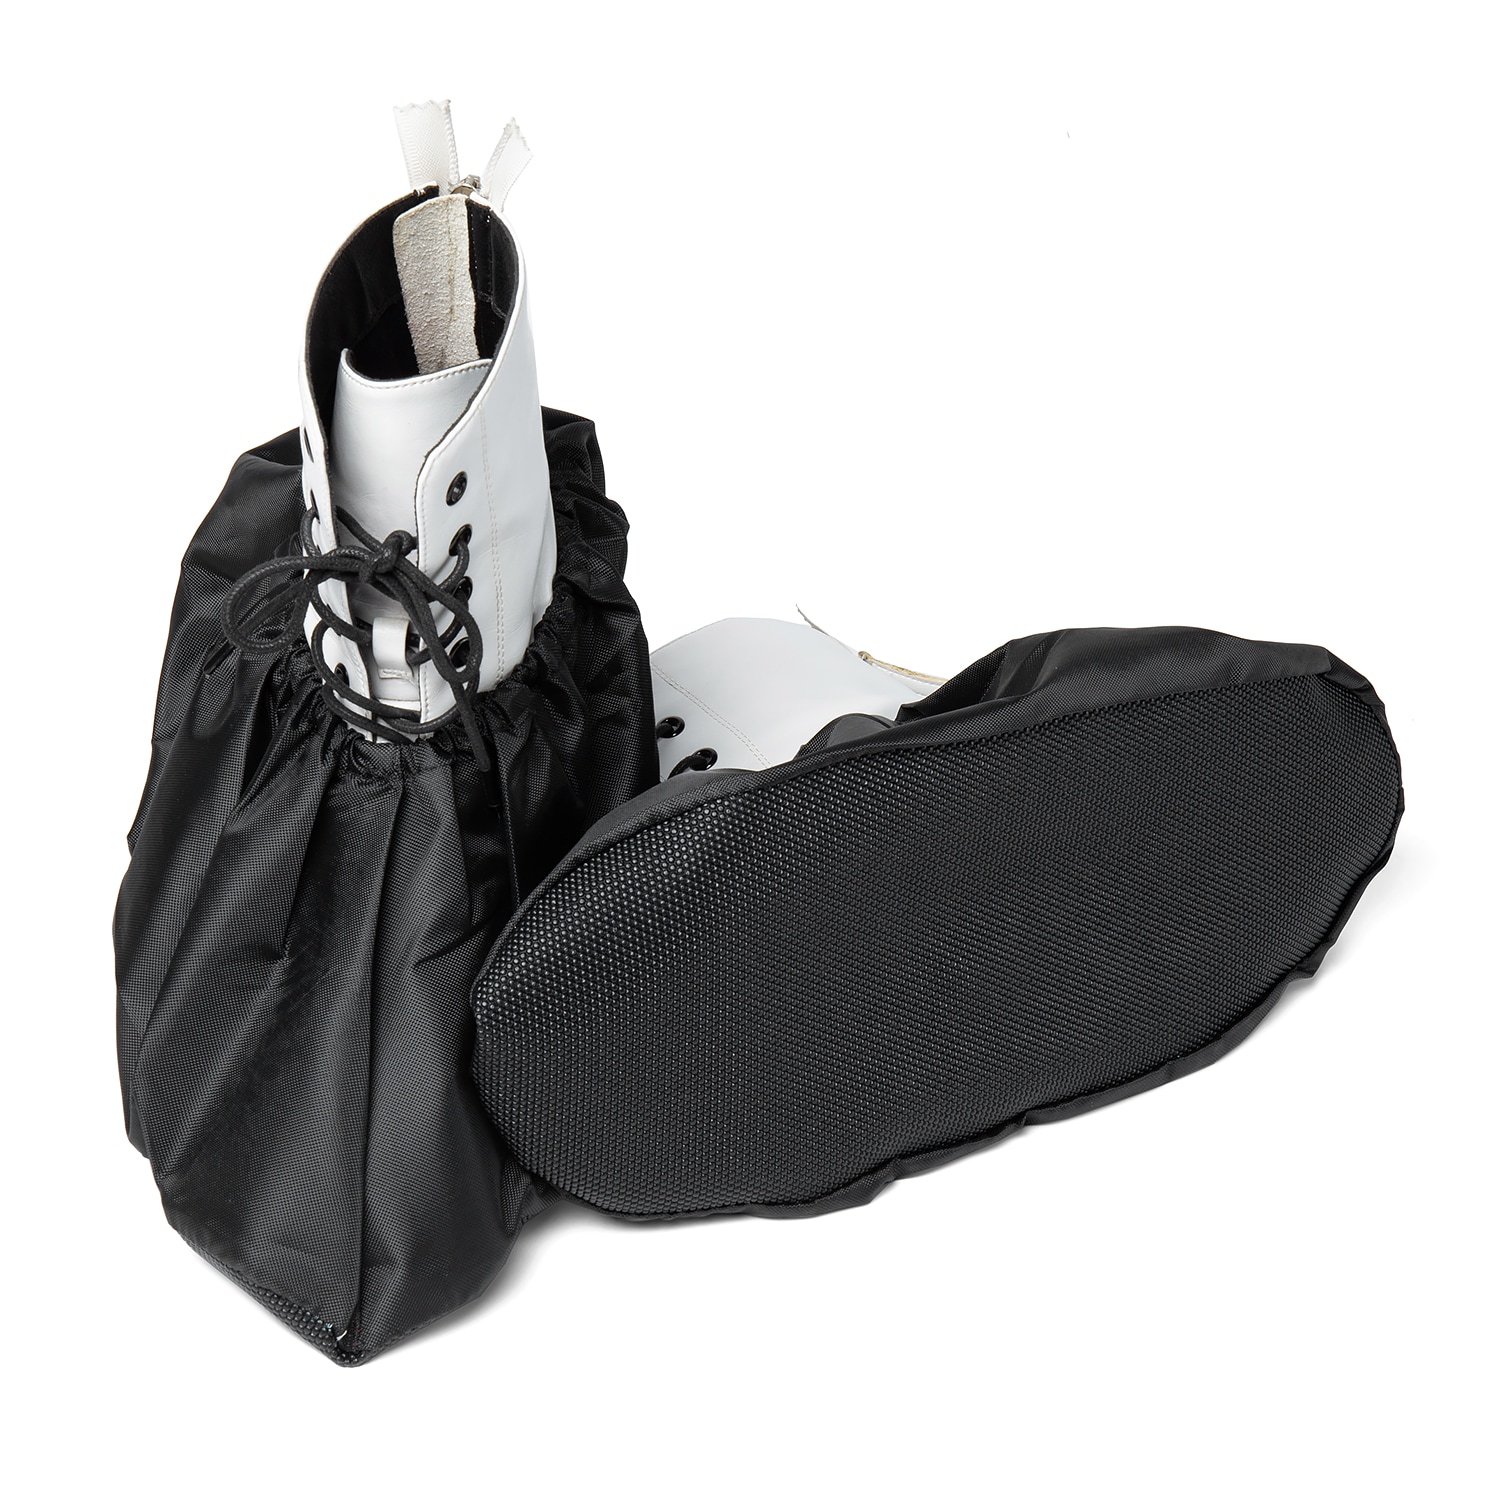 EZ-FLO 50-Pack Nylon Shoe Covers Size: One Size Fits All at